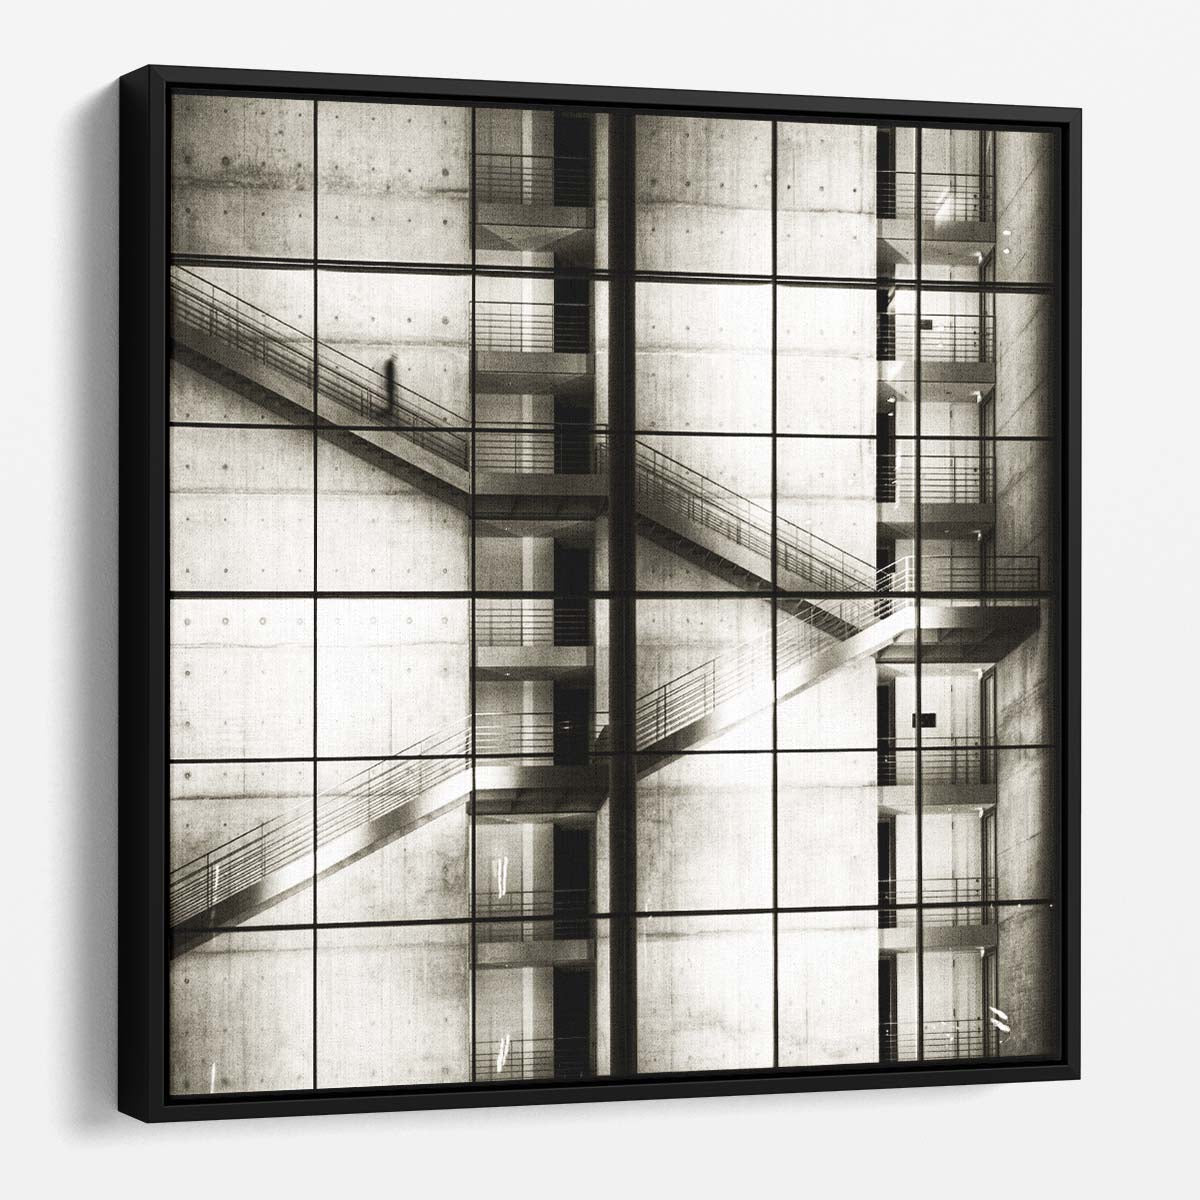 Iconic Berlin Stairway Cityscape Sepia Architectural Photography Wall Art by Luxuriance Designs. Made in USA.